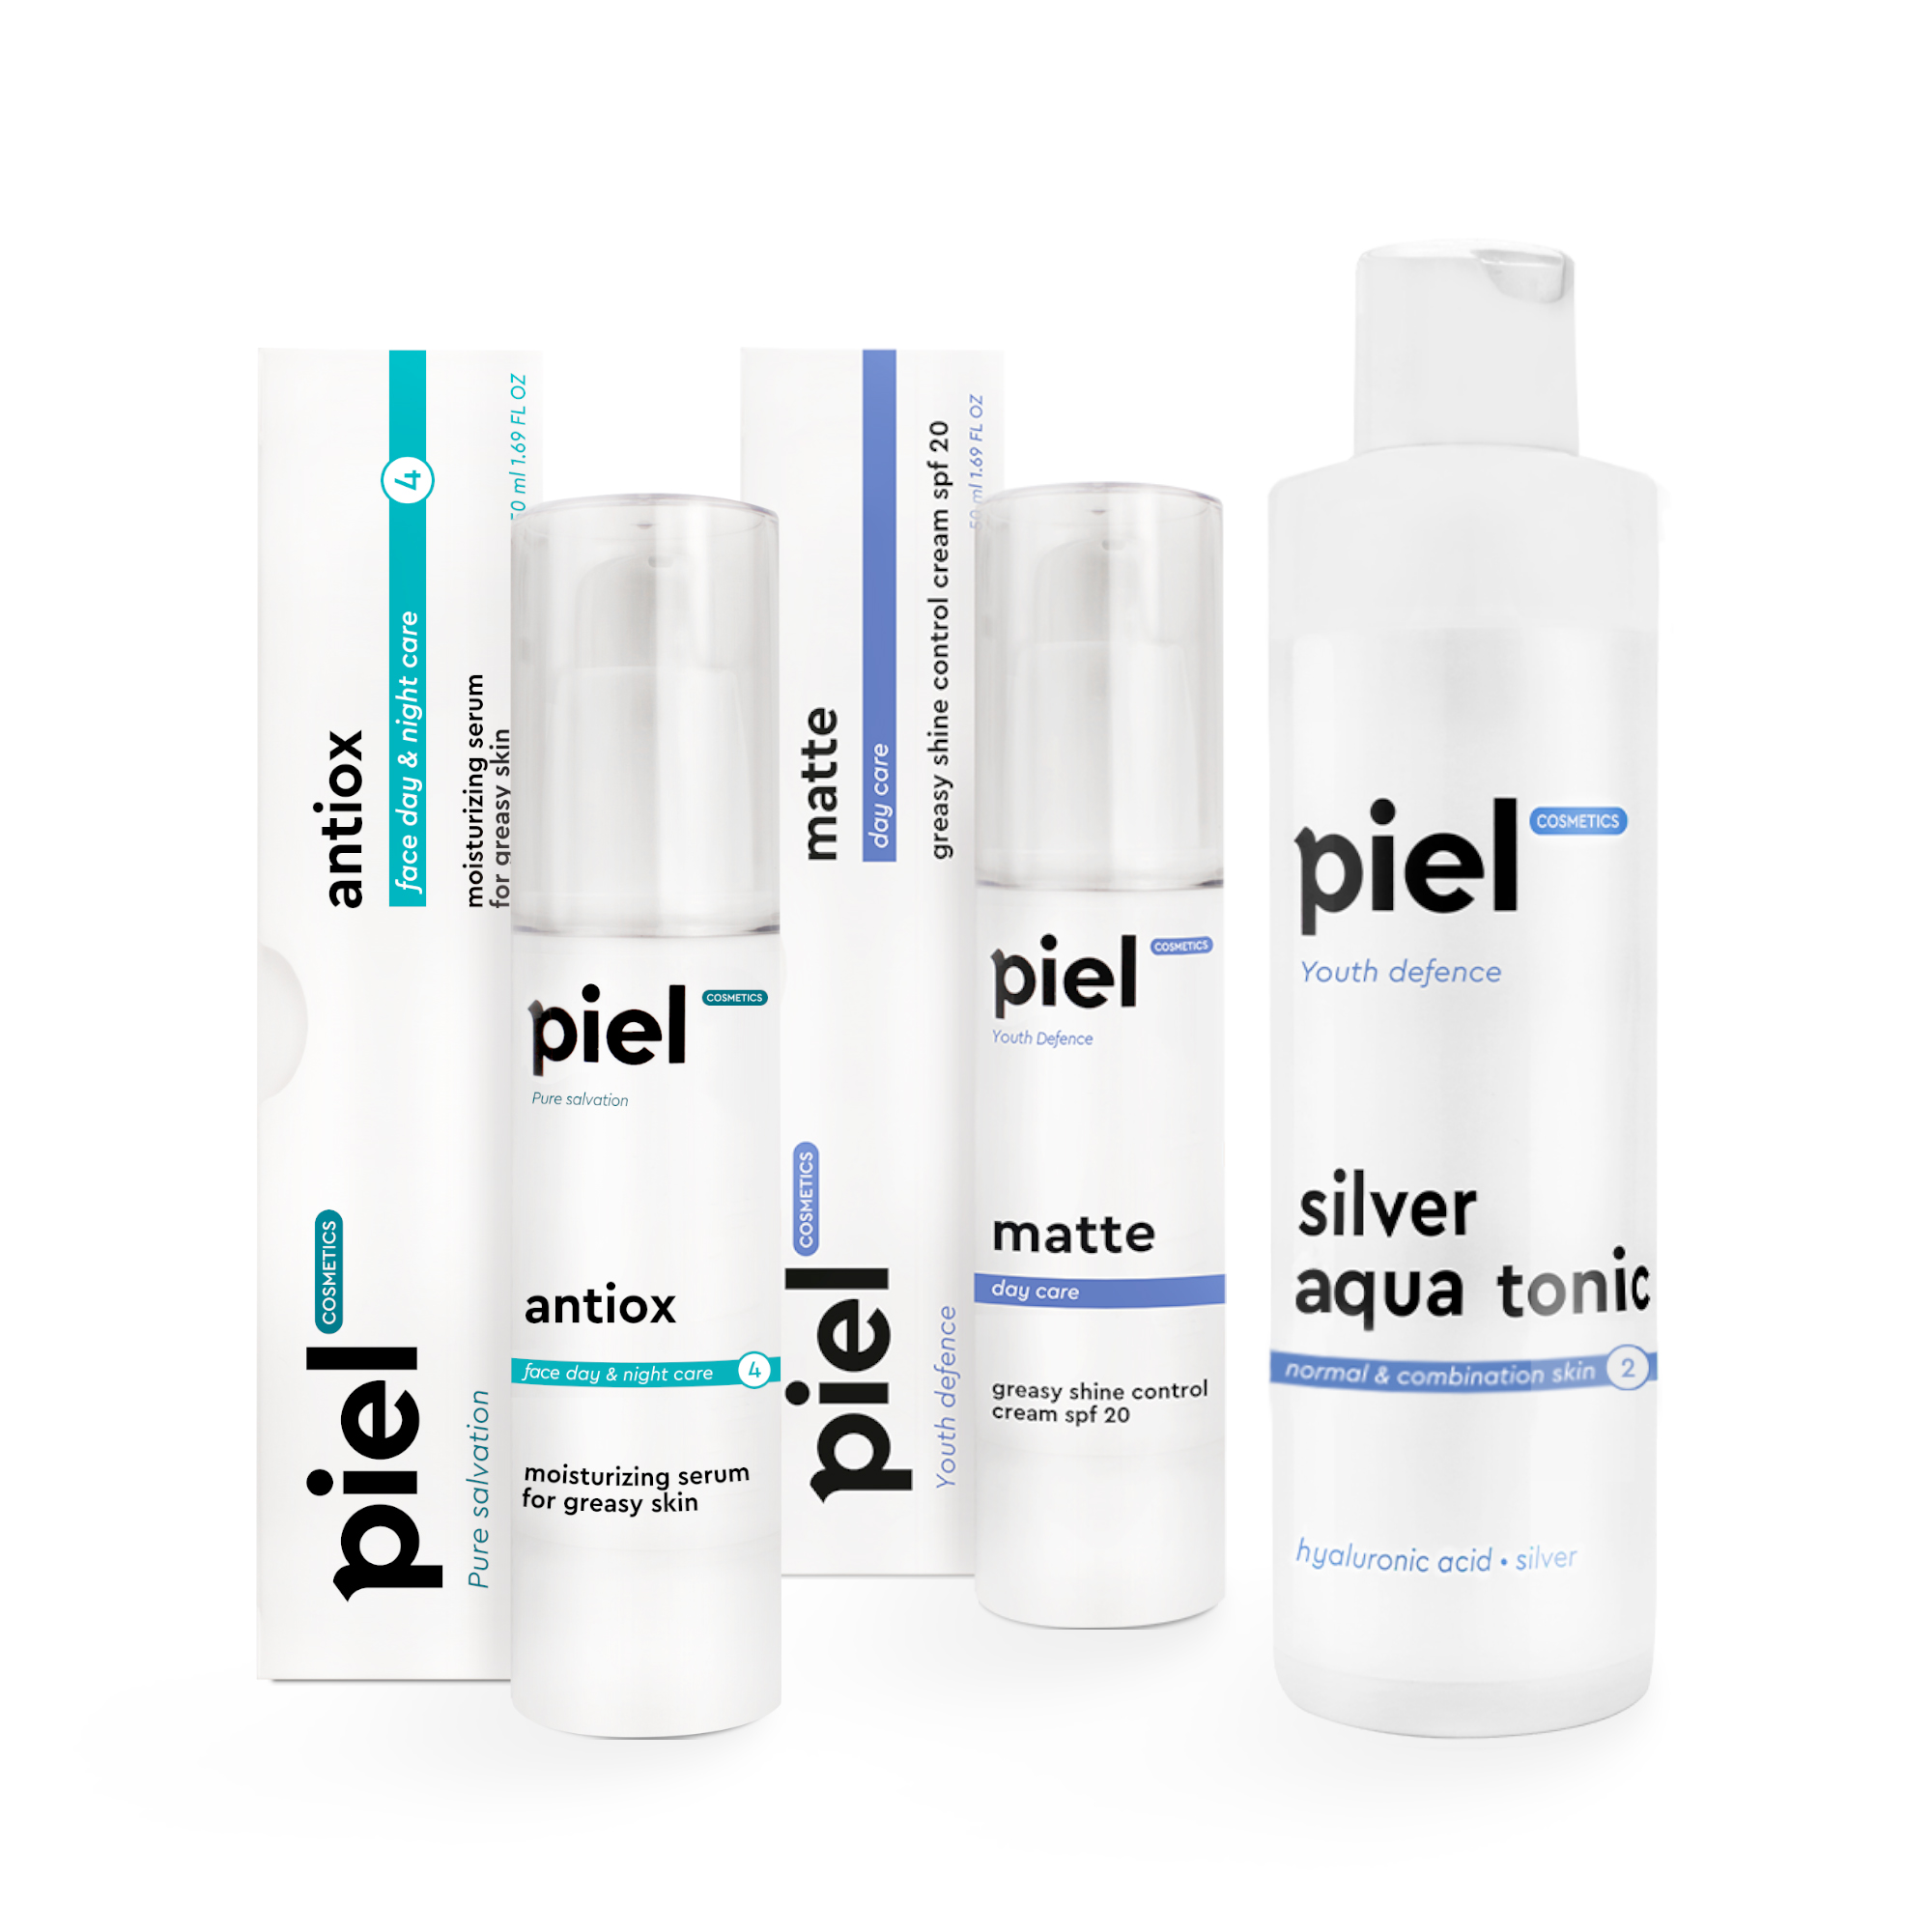 Skin Care Set: Protection and Moisturizing for Combination Skin